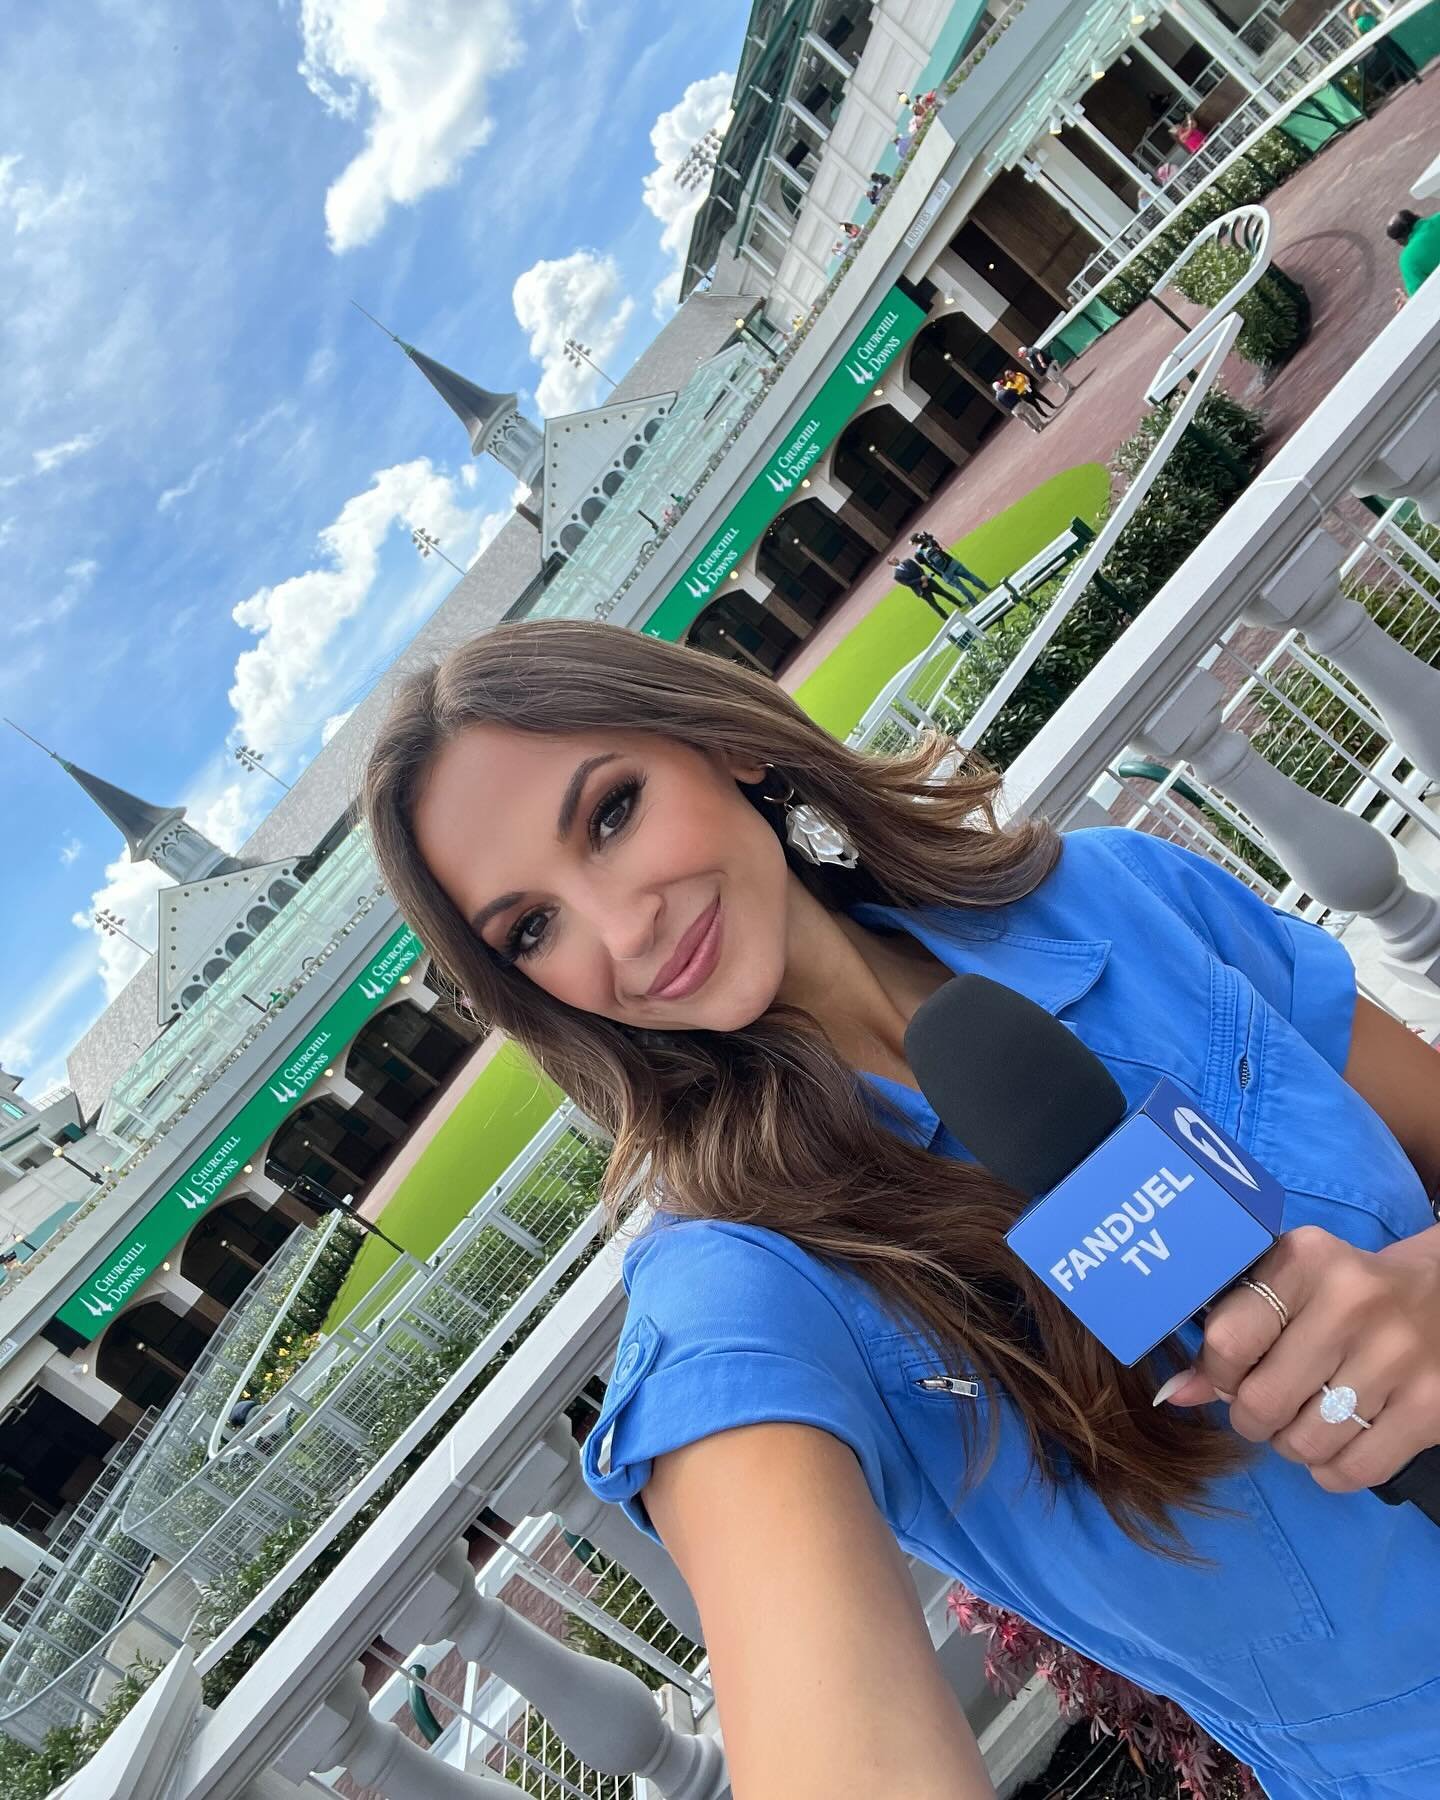 Me and the @fandueltv crew are taking votes on if my (cute!) jumpsuit looked more like scrubs or if I&rsquo;m ready to change your tire. 💁🏽&zwj;♀️ But who cares because it&rsquo;s DERBY WEEK! Two days down! Three more fun ones ahead!

#kyderby #ken